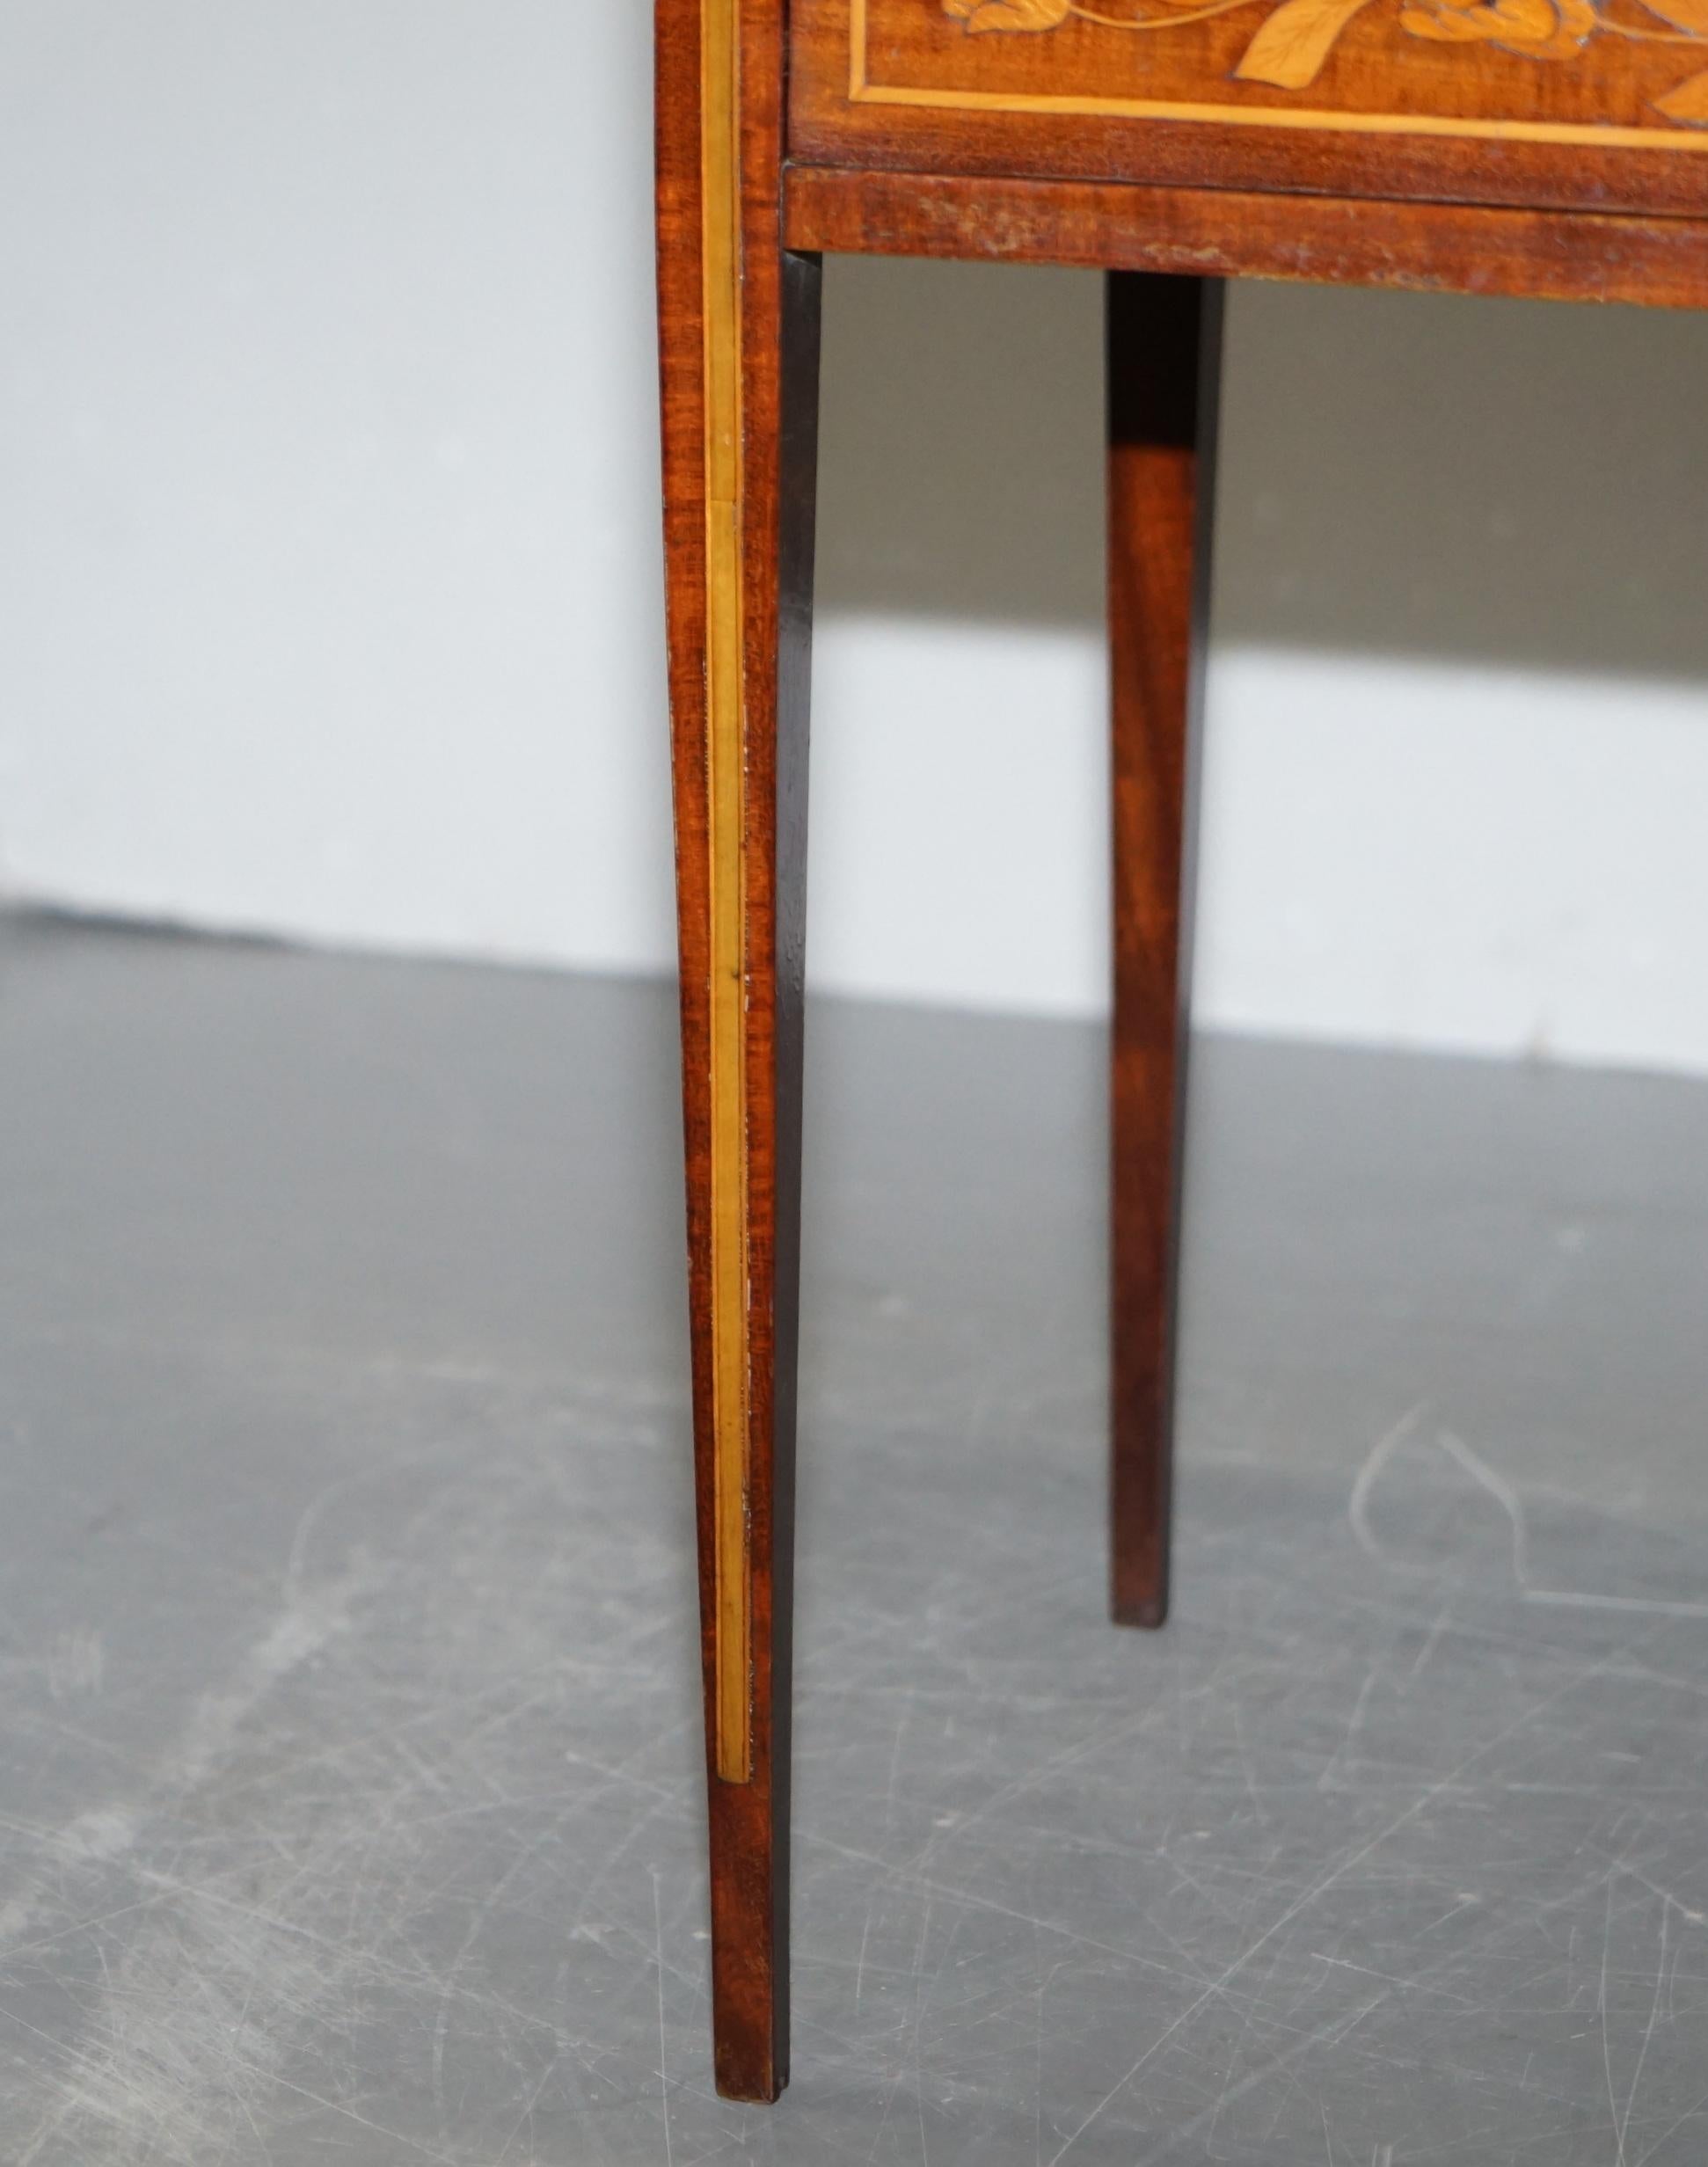 Rare 19th Century Dutch Marquetry Inlaid Side Table with Tambour Fronted Door For Sale 5